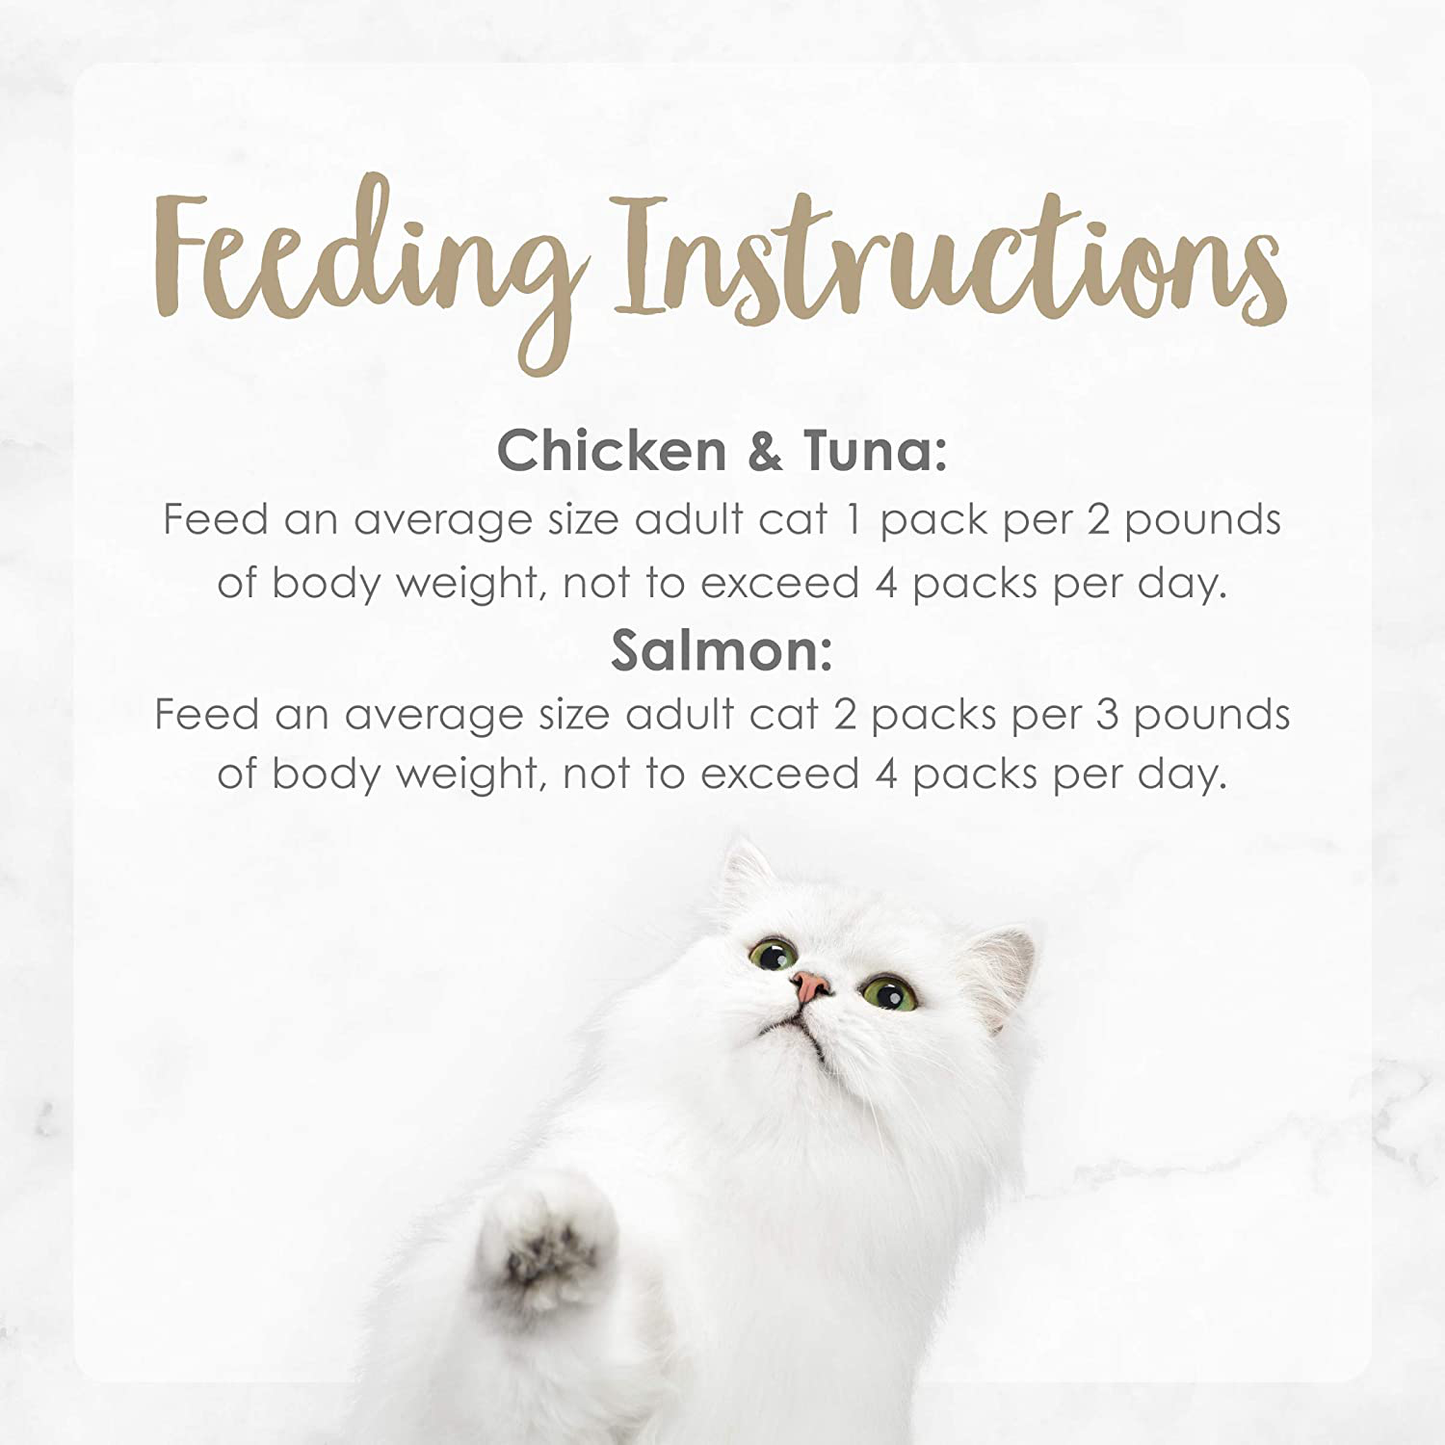 Purina Fancy Feast Limited Ingredient Cat Treats Animals & Pet Supplies > Pet Supplies > Cat Supplies > Cat Treats Purina Fancy Feast   